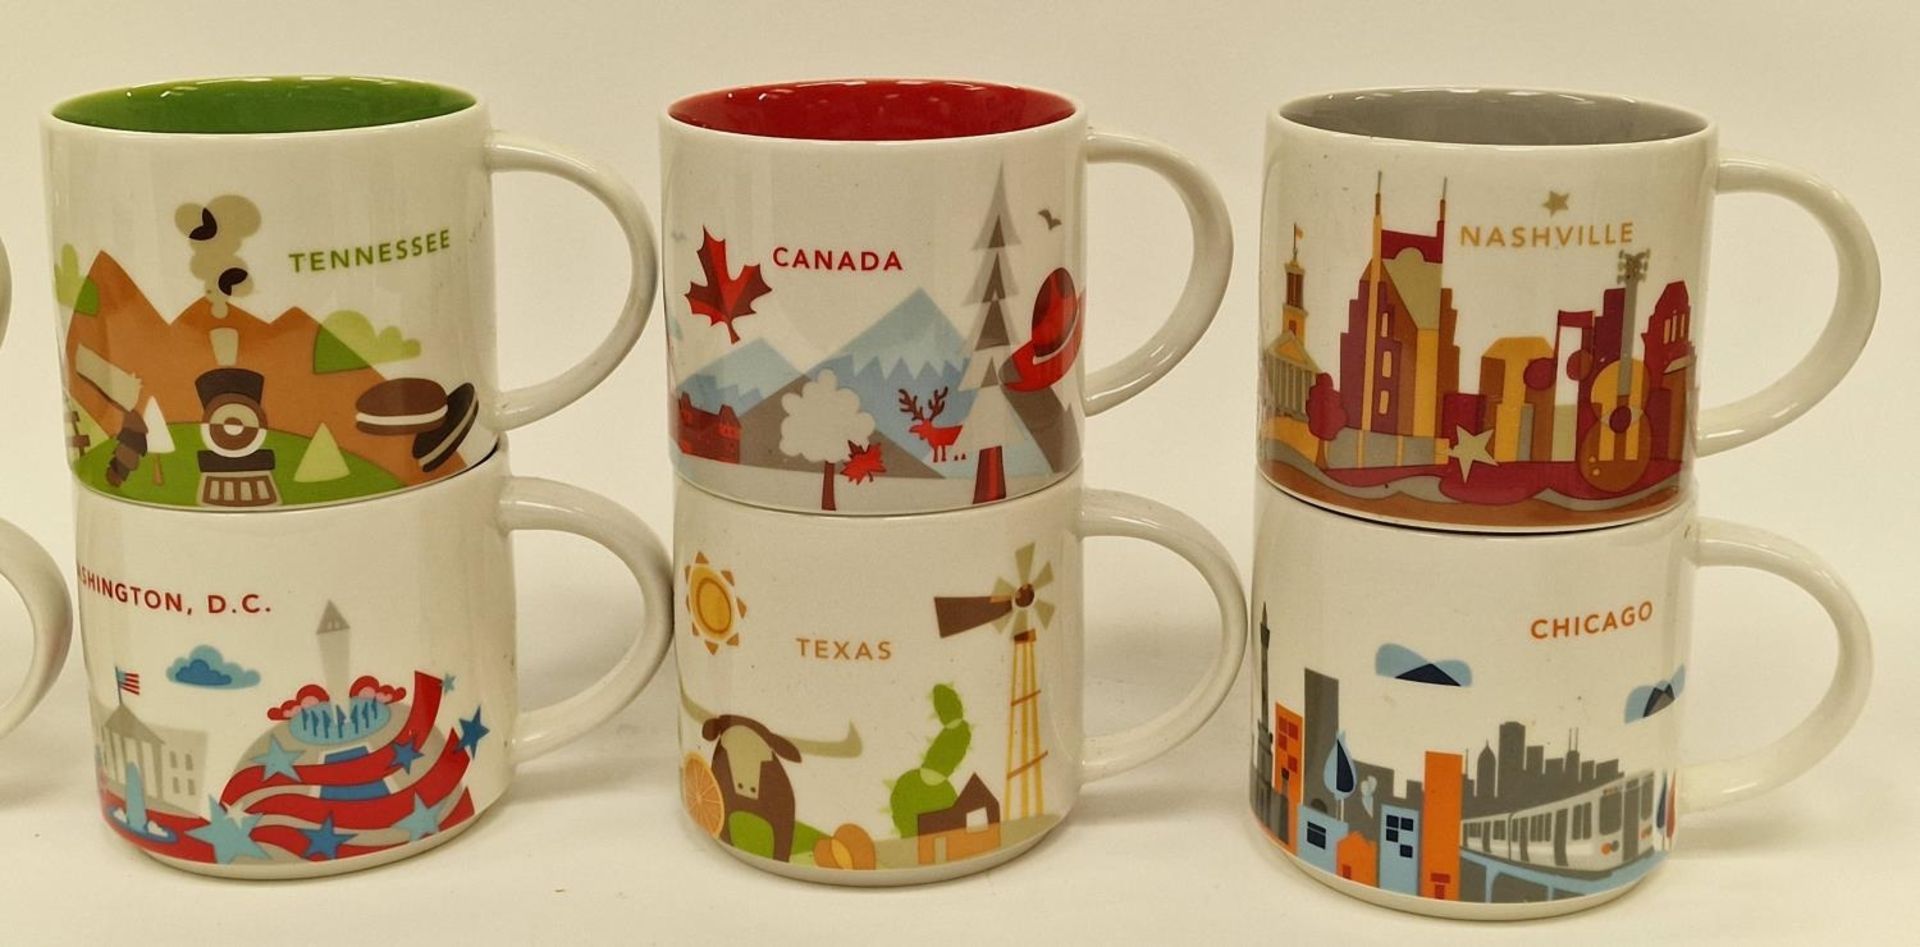 Starbucks "You Are Here" collection of U.S. and other porcelain mugs to include Boston, Texas, - Image 3 of 4